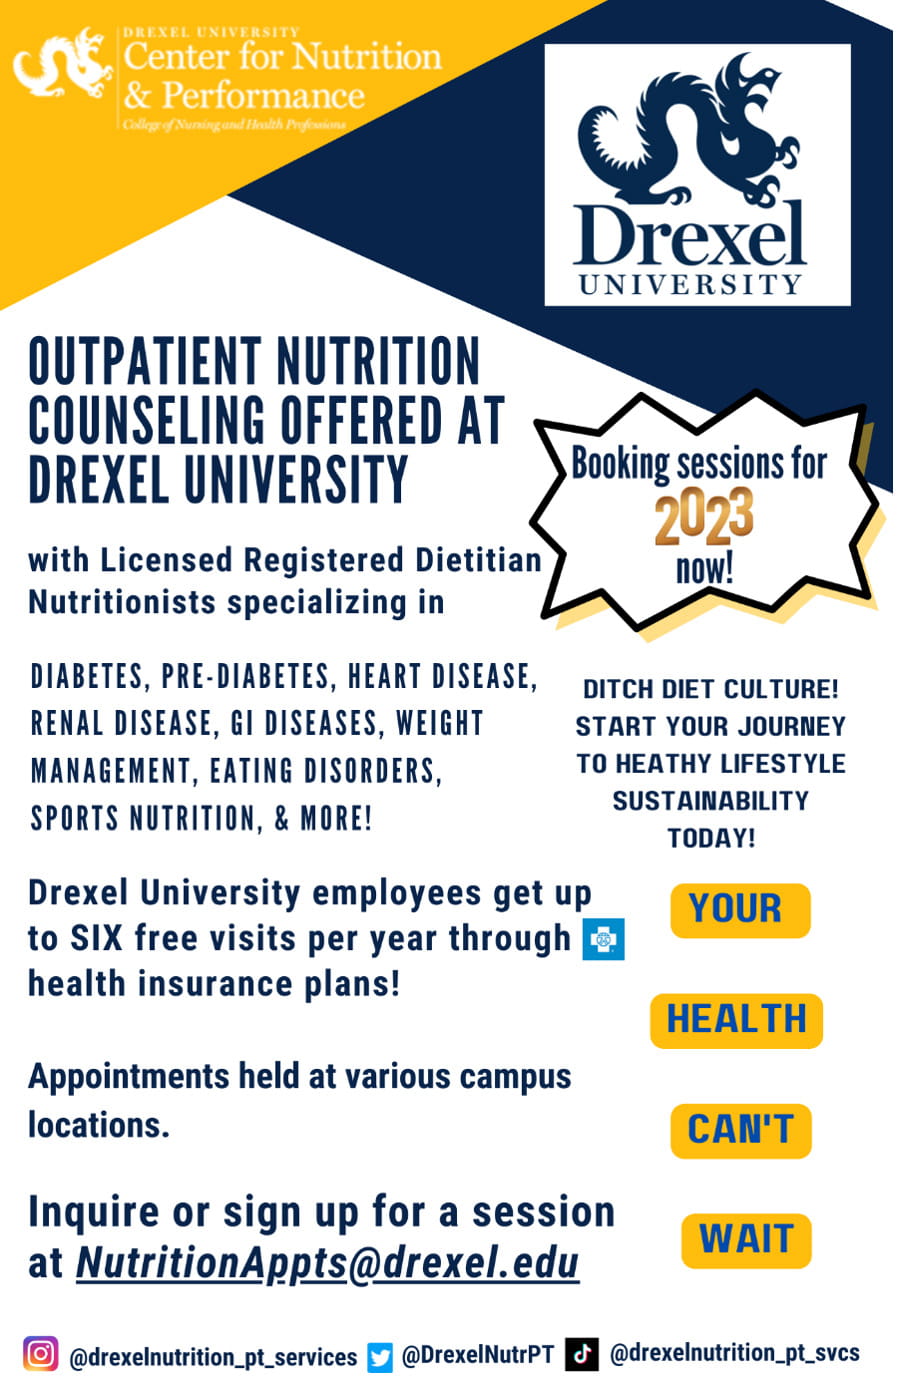 Drexel University Center for Nutrition Performance. Outpatient nutrition counseling offered at Drexel University with licensed registered dietician nutritionists specializing in diabetes, pre-diabetes, heart disease, renal disease, GI disease, weight management, eating disorders, sports nutrition and more! Booking sessions for 2023 now! Ditch diet culture! Start your journey to healthy lifestyle sustainability today!  Drexel University employees get up to SIX free visits per year through Blue Cross health insurance plans! Appointments held at various campus locations. Inquirer or sign up for a session at nutritionappts@drexe.edu. Your health can’t wait. Instagram: @drexelnutrition_pt_services Twitter: DrexelNutrPT Tiktok: @drexelnutrition_pt_svcs